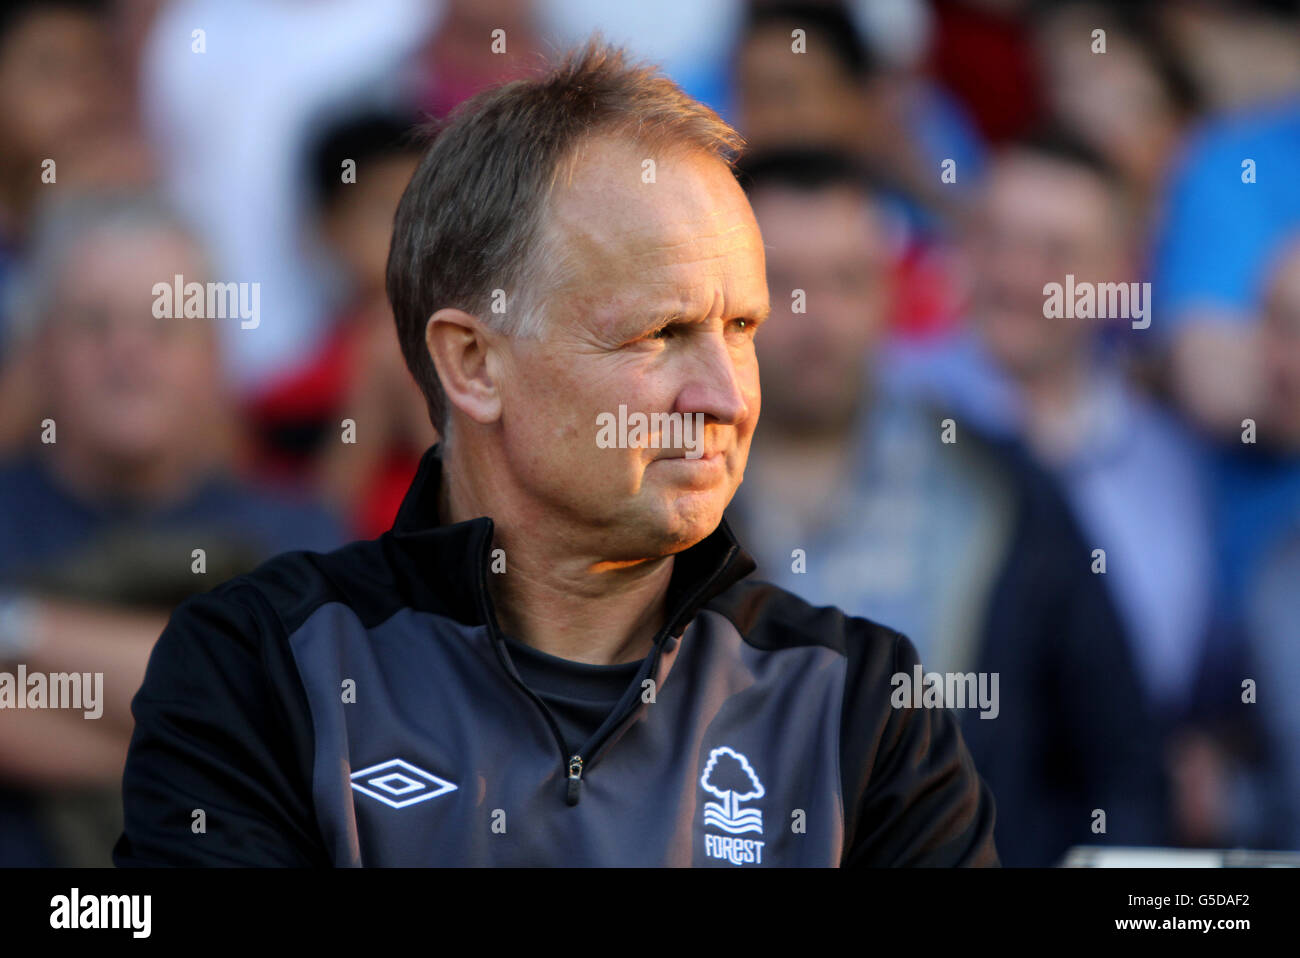 Soccer - Pre Season Friendly - Nottingham Forest v West Bromwich Albion - City Ground. Sean O'Driscoll, Nottingham Forest manager Stock Photo